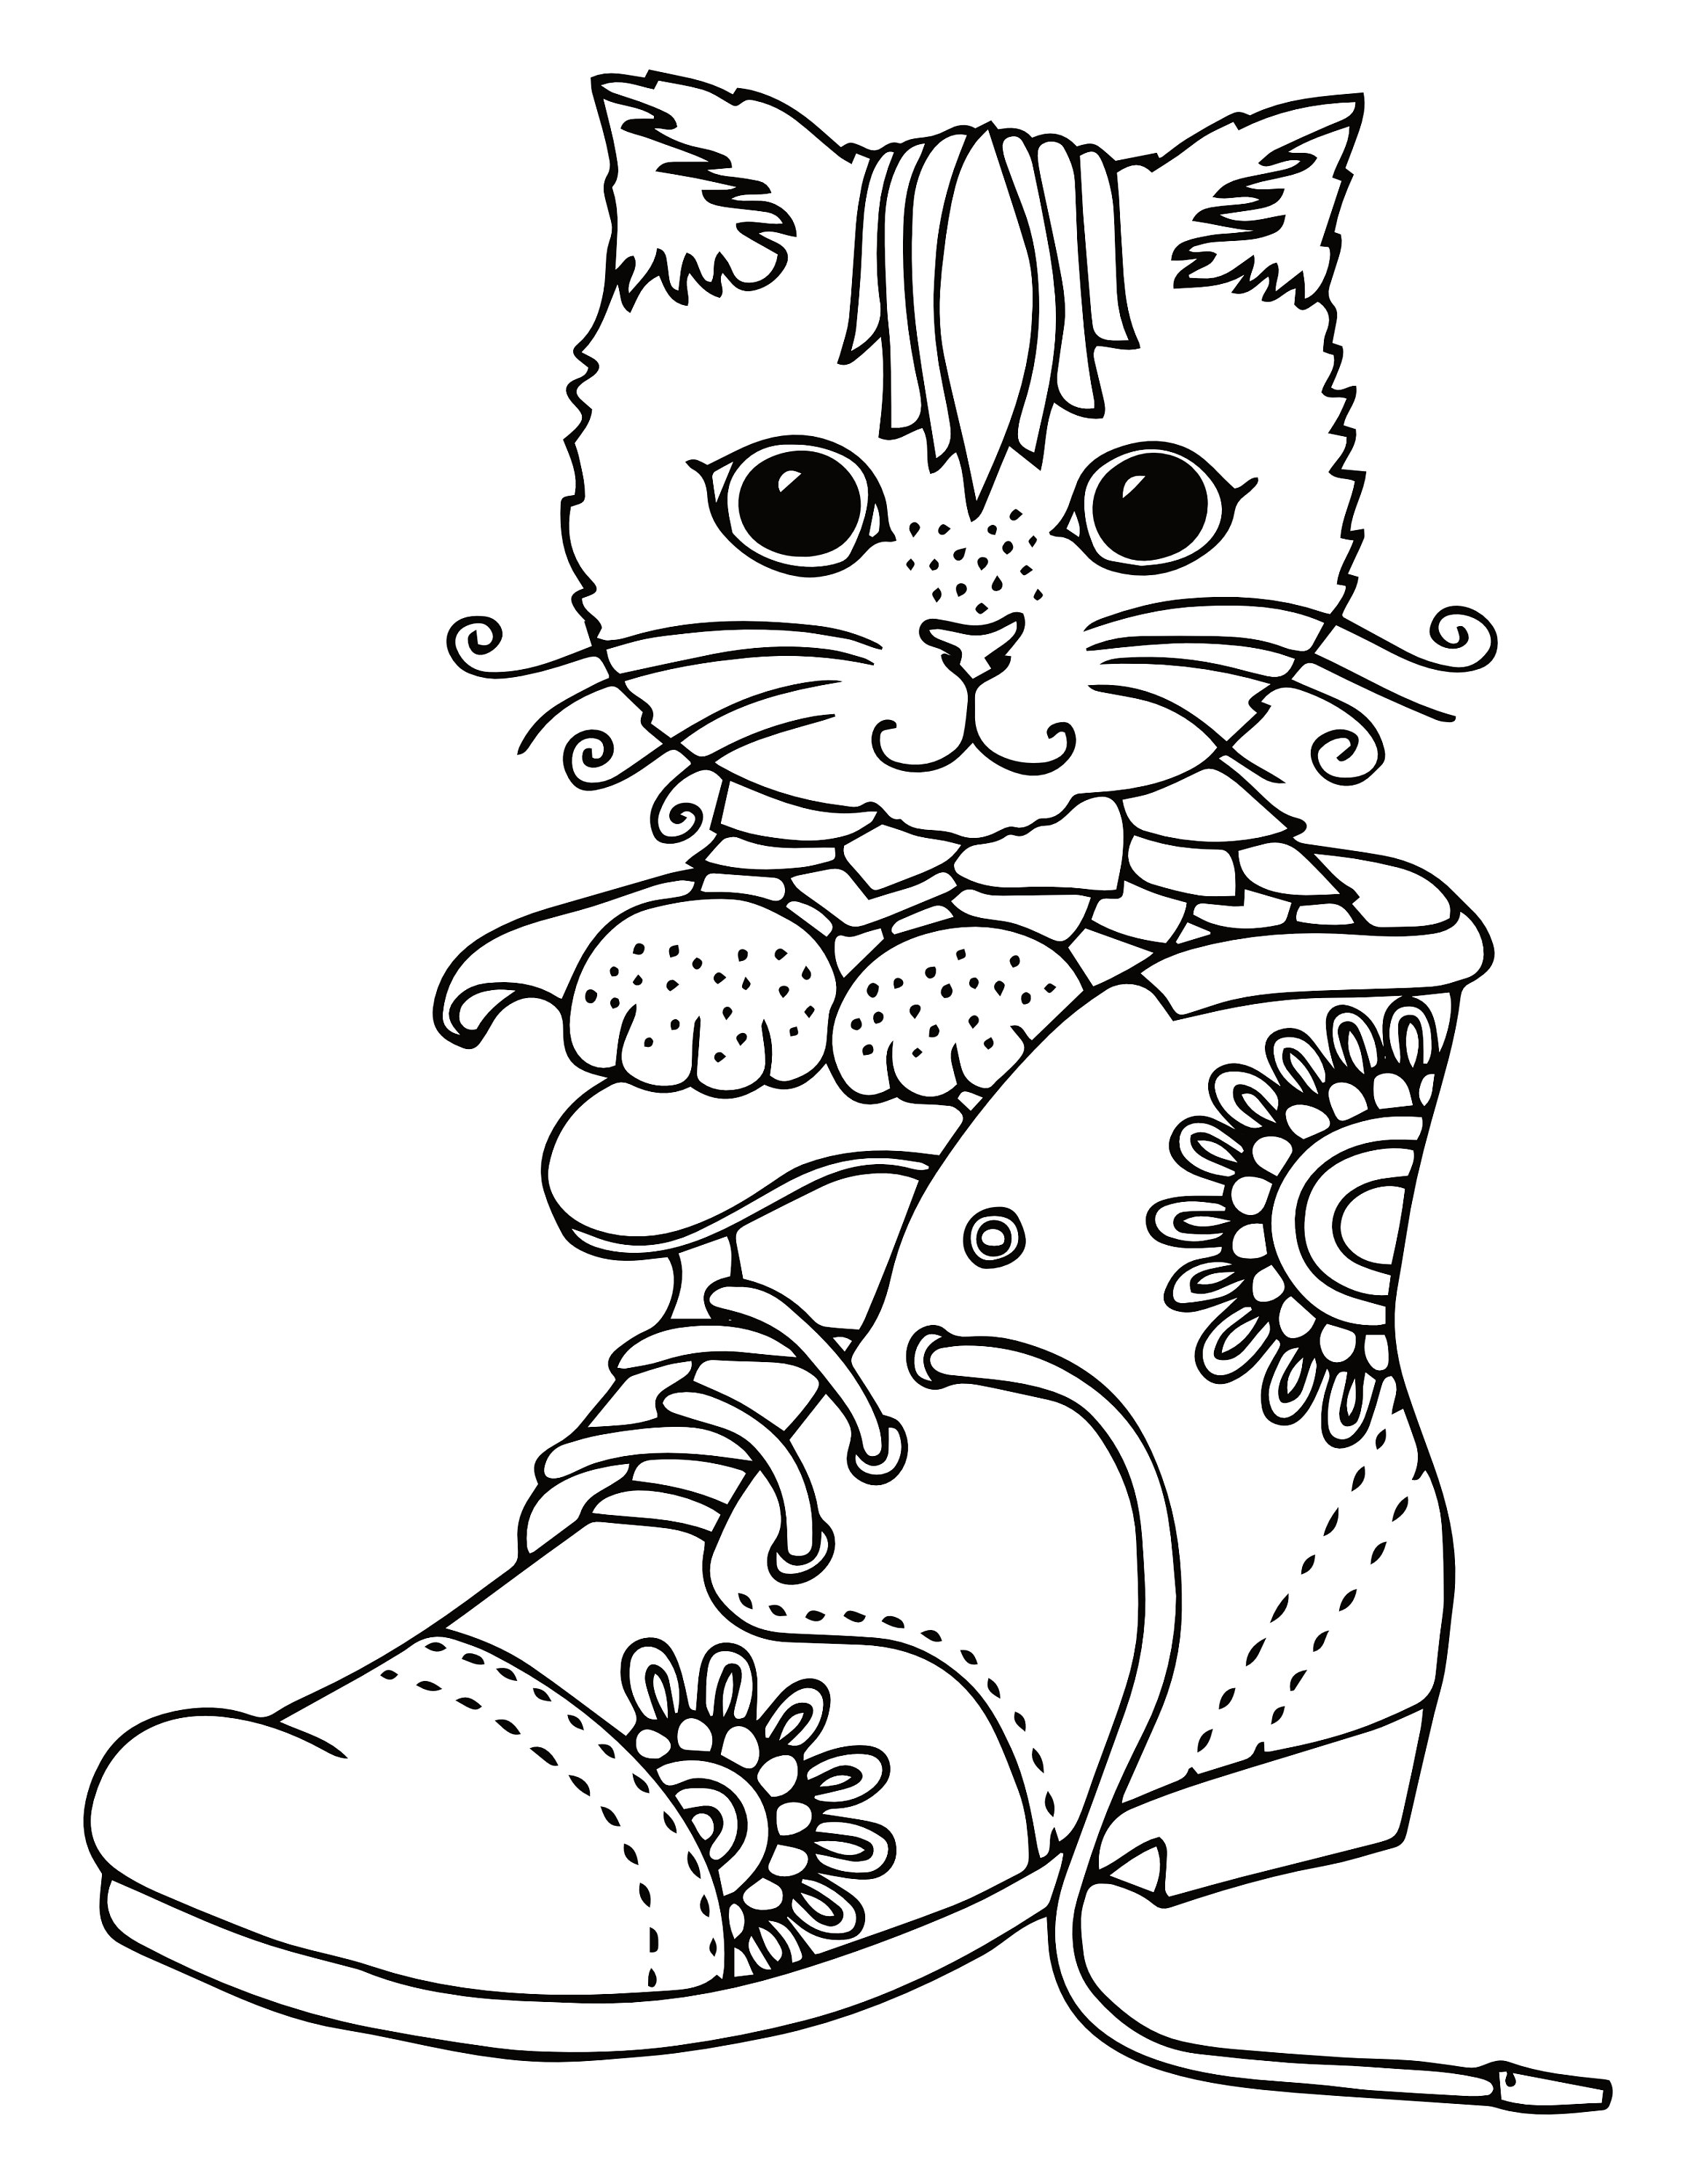 20 Free Printable Kitten Coloring Pages Everfreecolor - vrogue.co